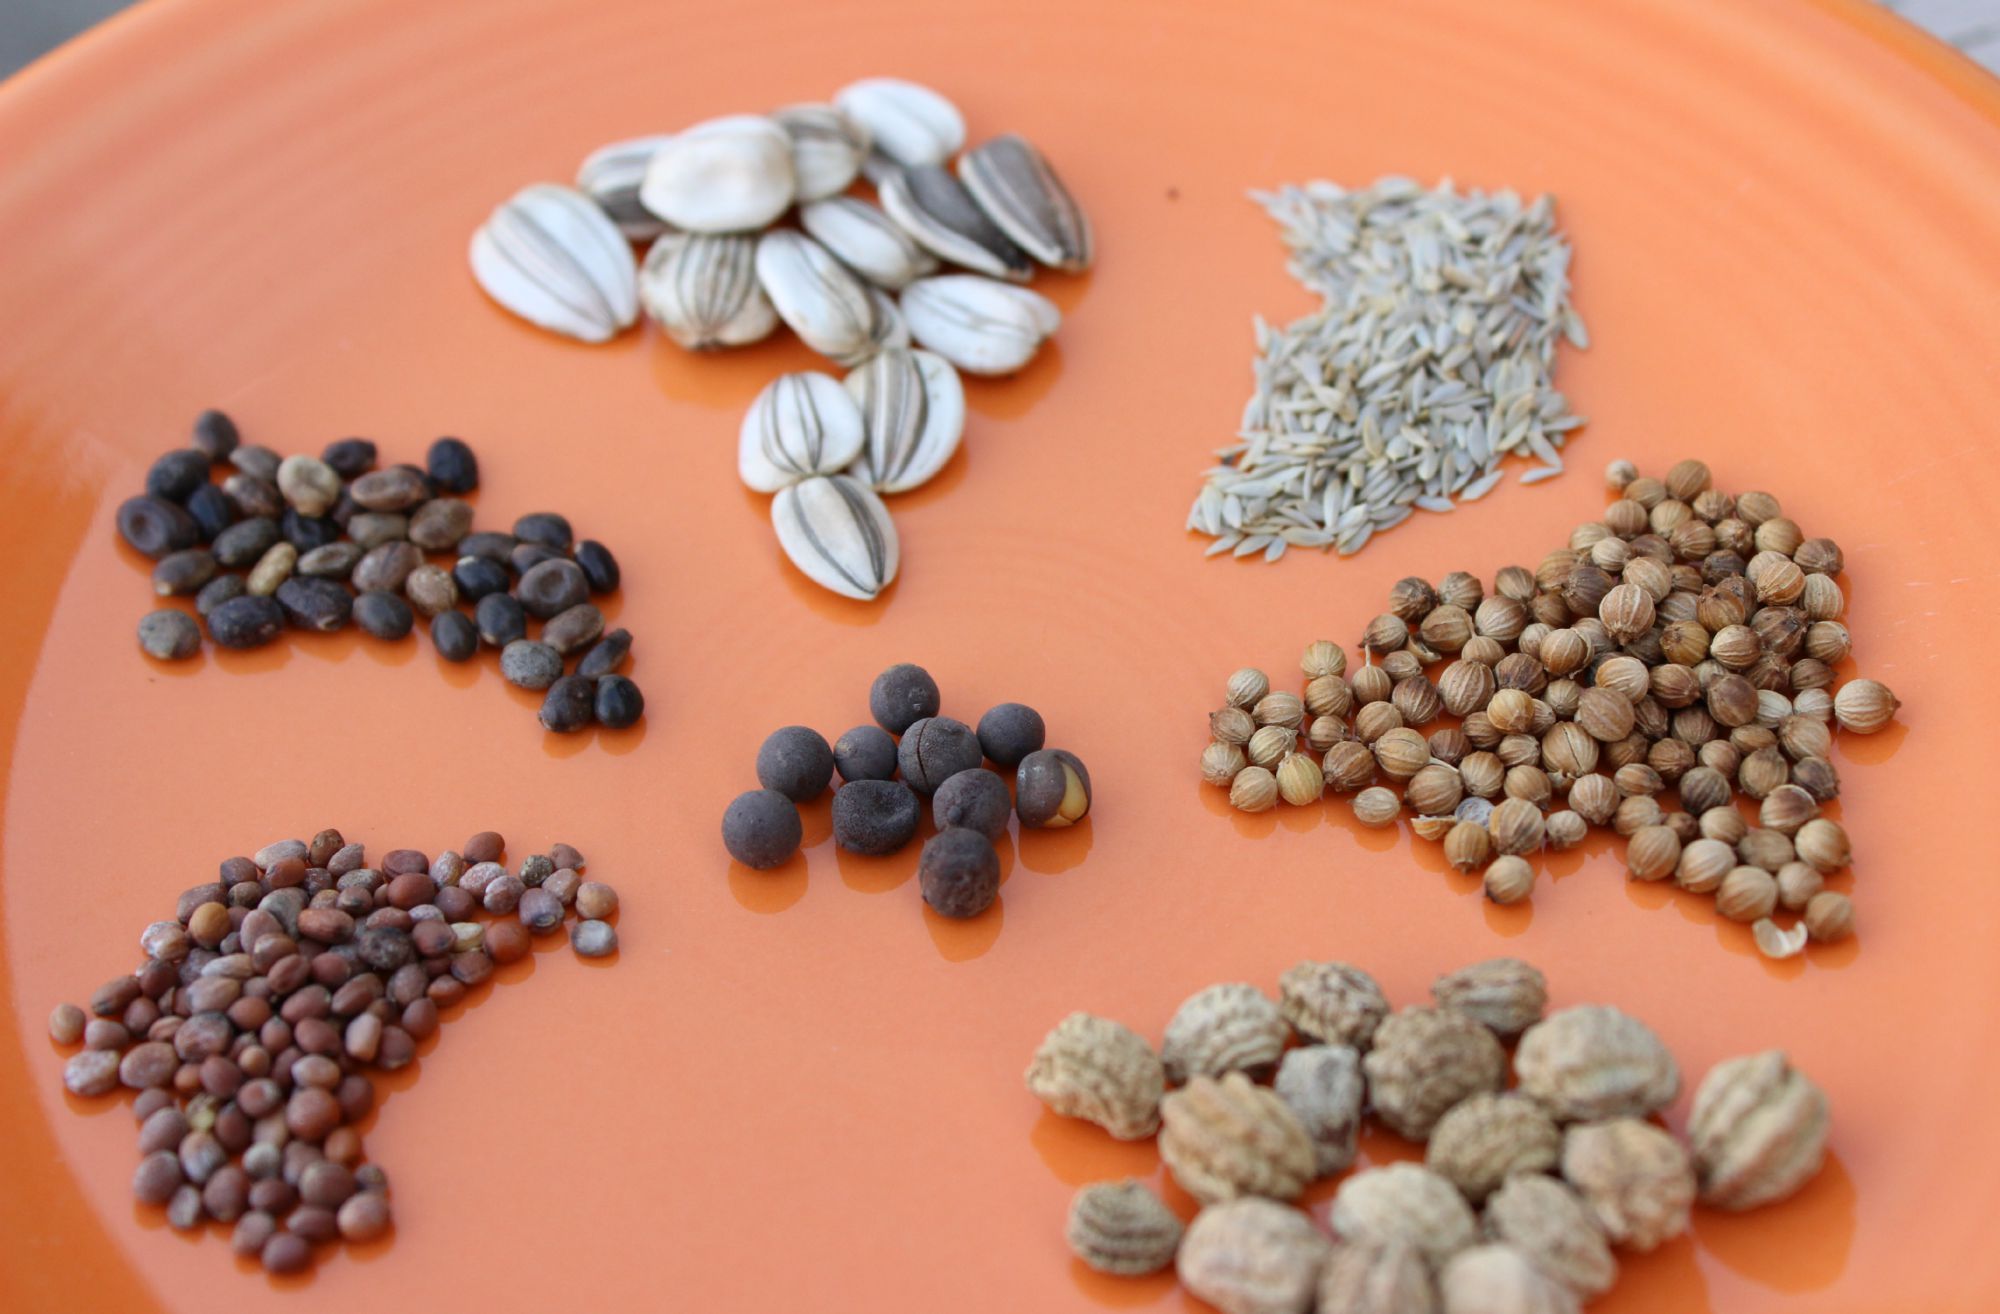 How To Sterilize Seeds For Planting